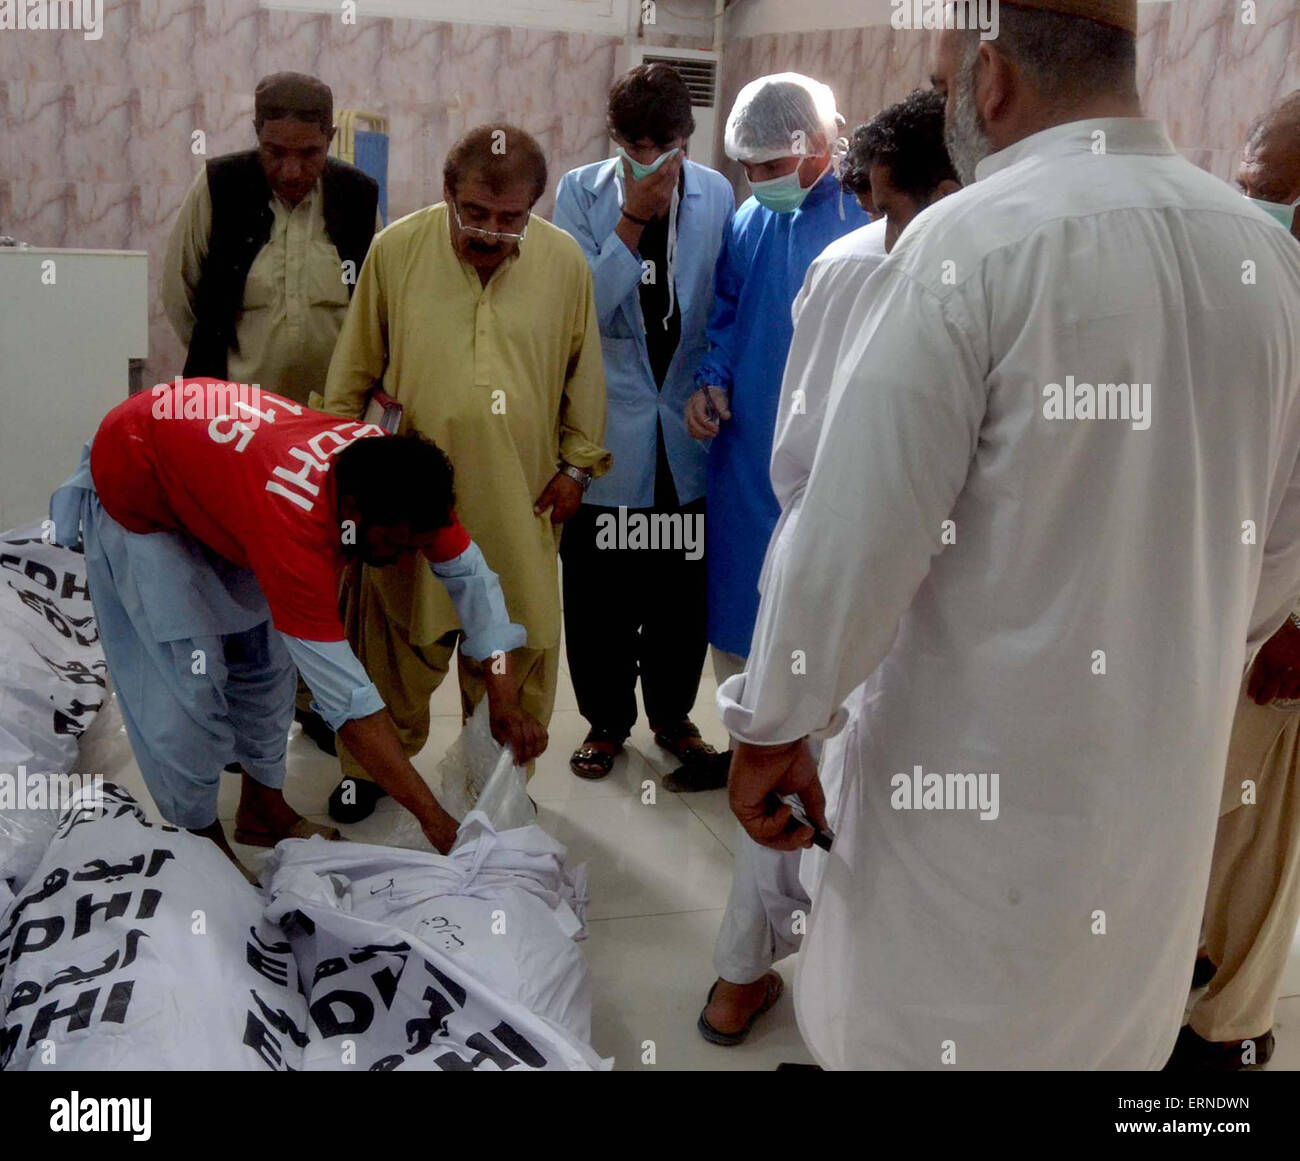 Dead bodies found in Kalat are being kept at Morgue of Civil Hospital in Quetta on Friday, June 05, 2015. Nine unidentified dead bodies found in Kalat, are well deadly shot by criminals. Stock Photo